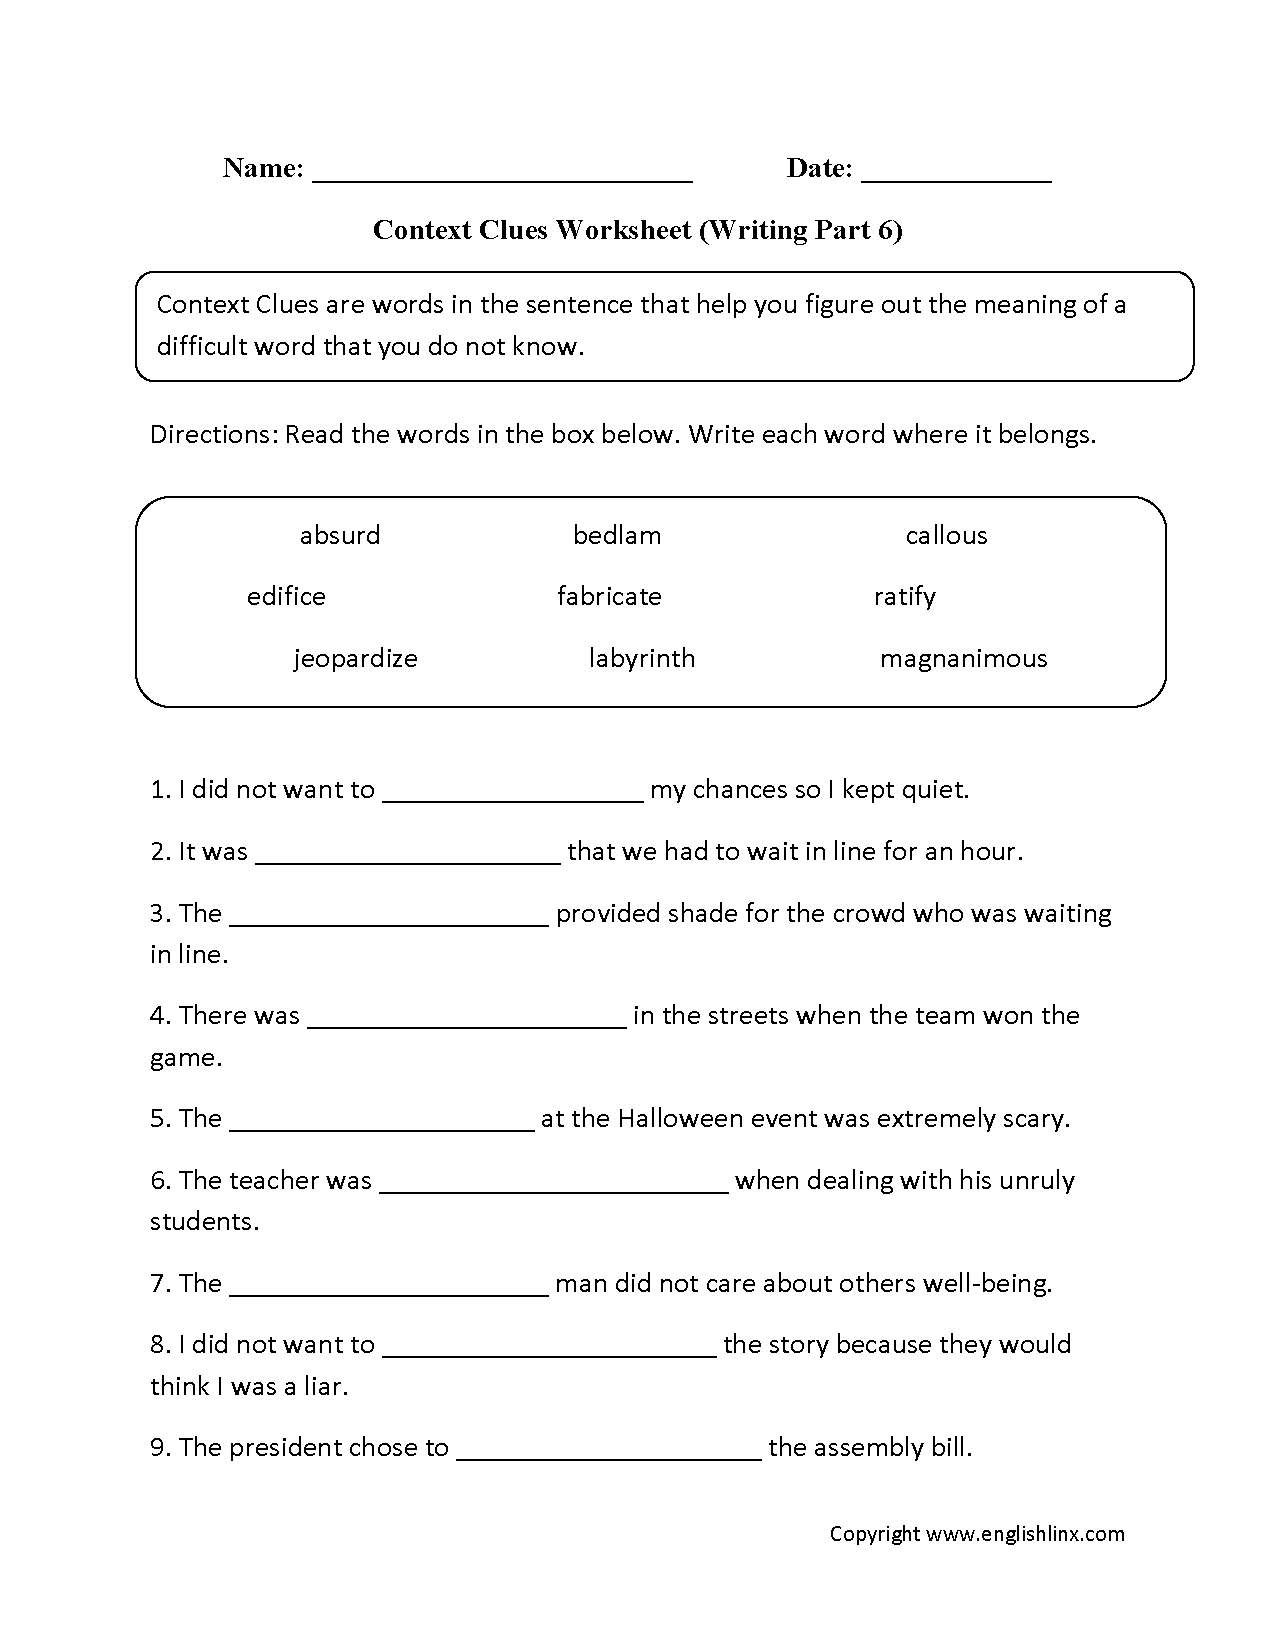 Context Clues Worksheets Writing Part 6 Advanced